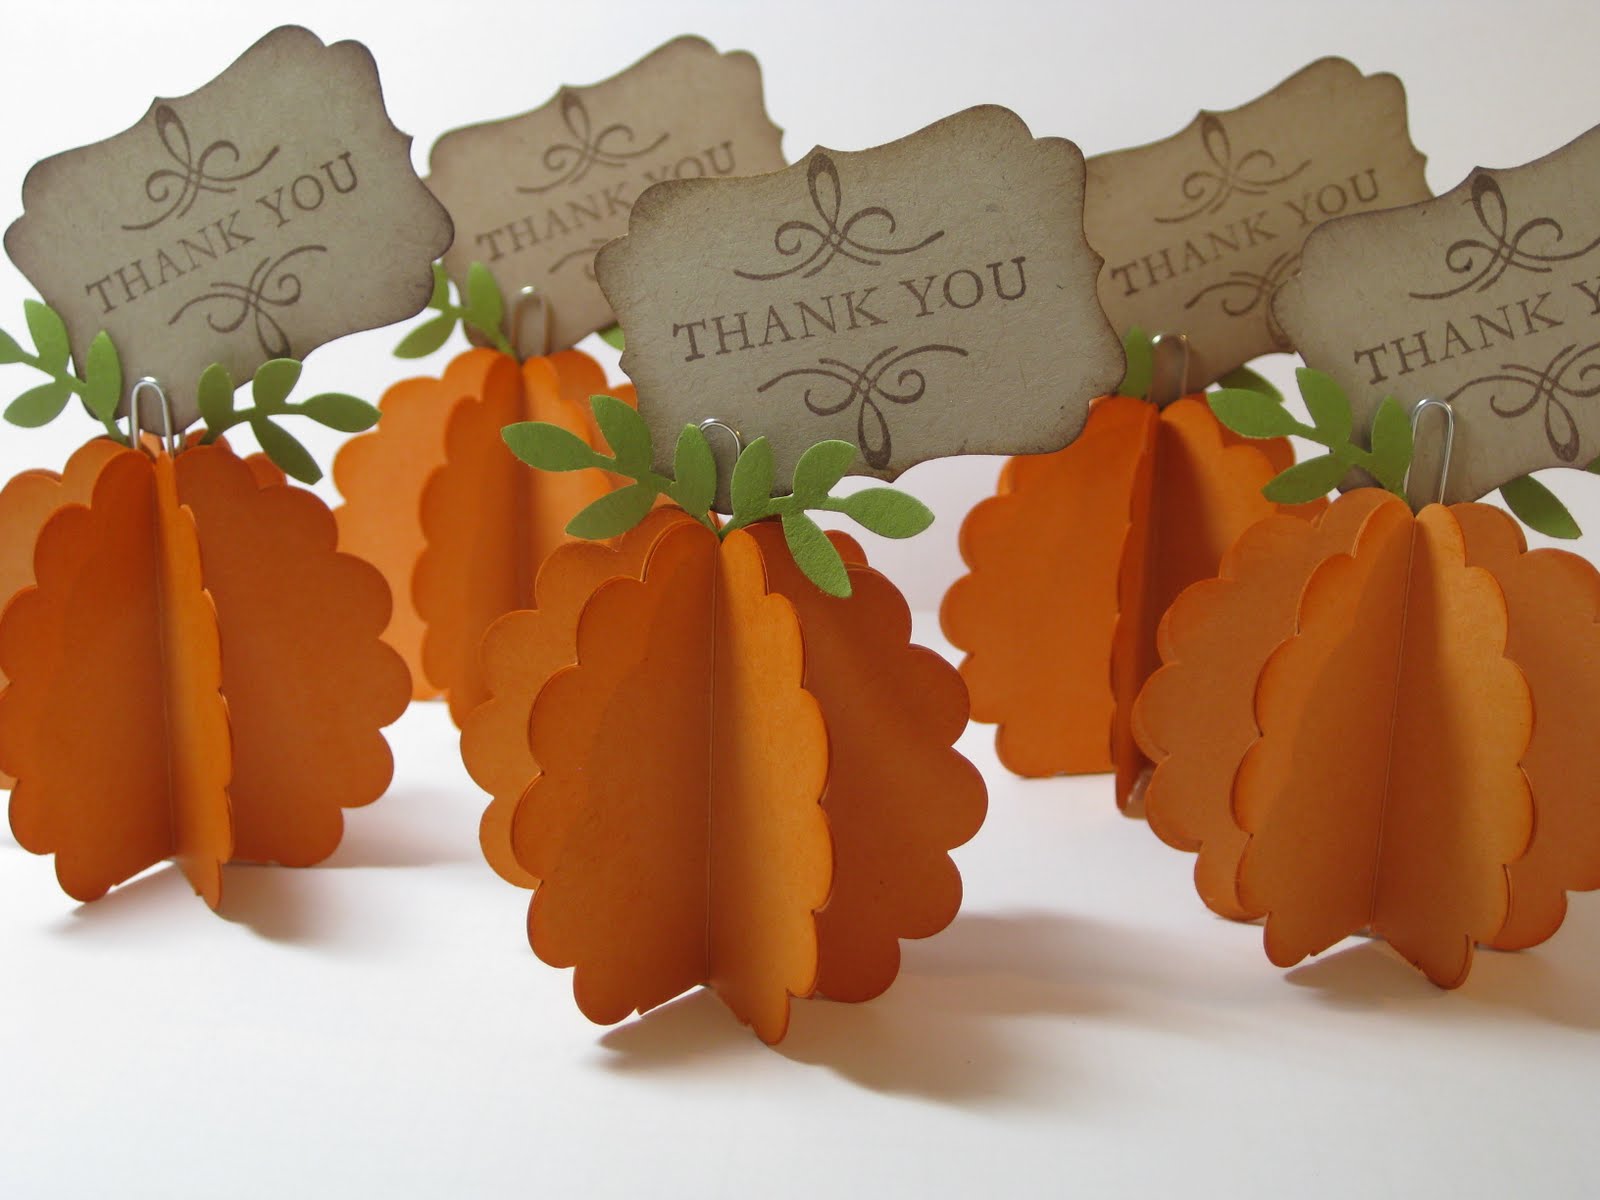 sweet-pea-bunny-thanksgiving-place-cards-or-picture-holder